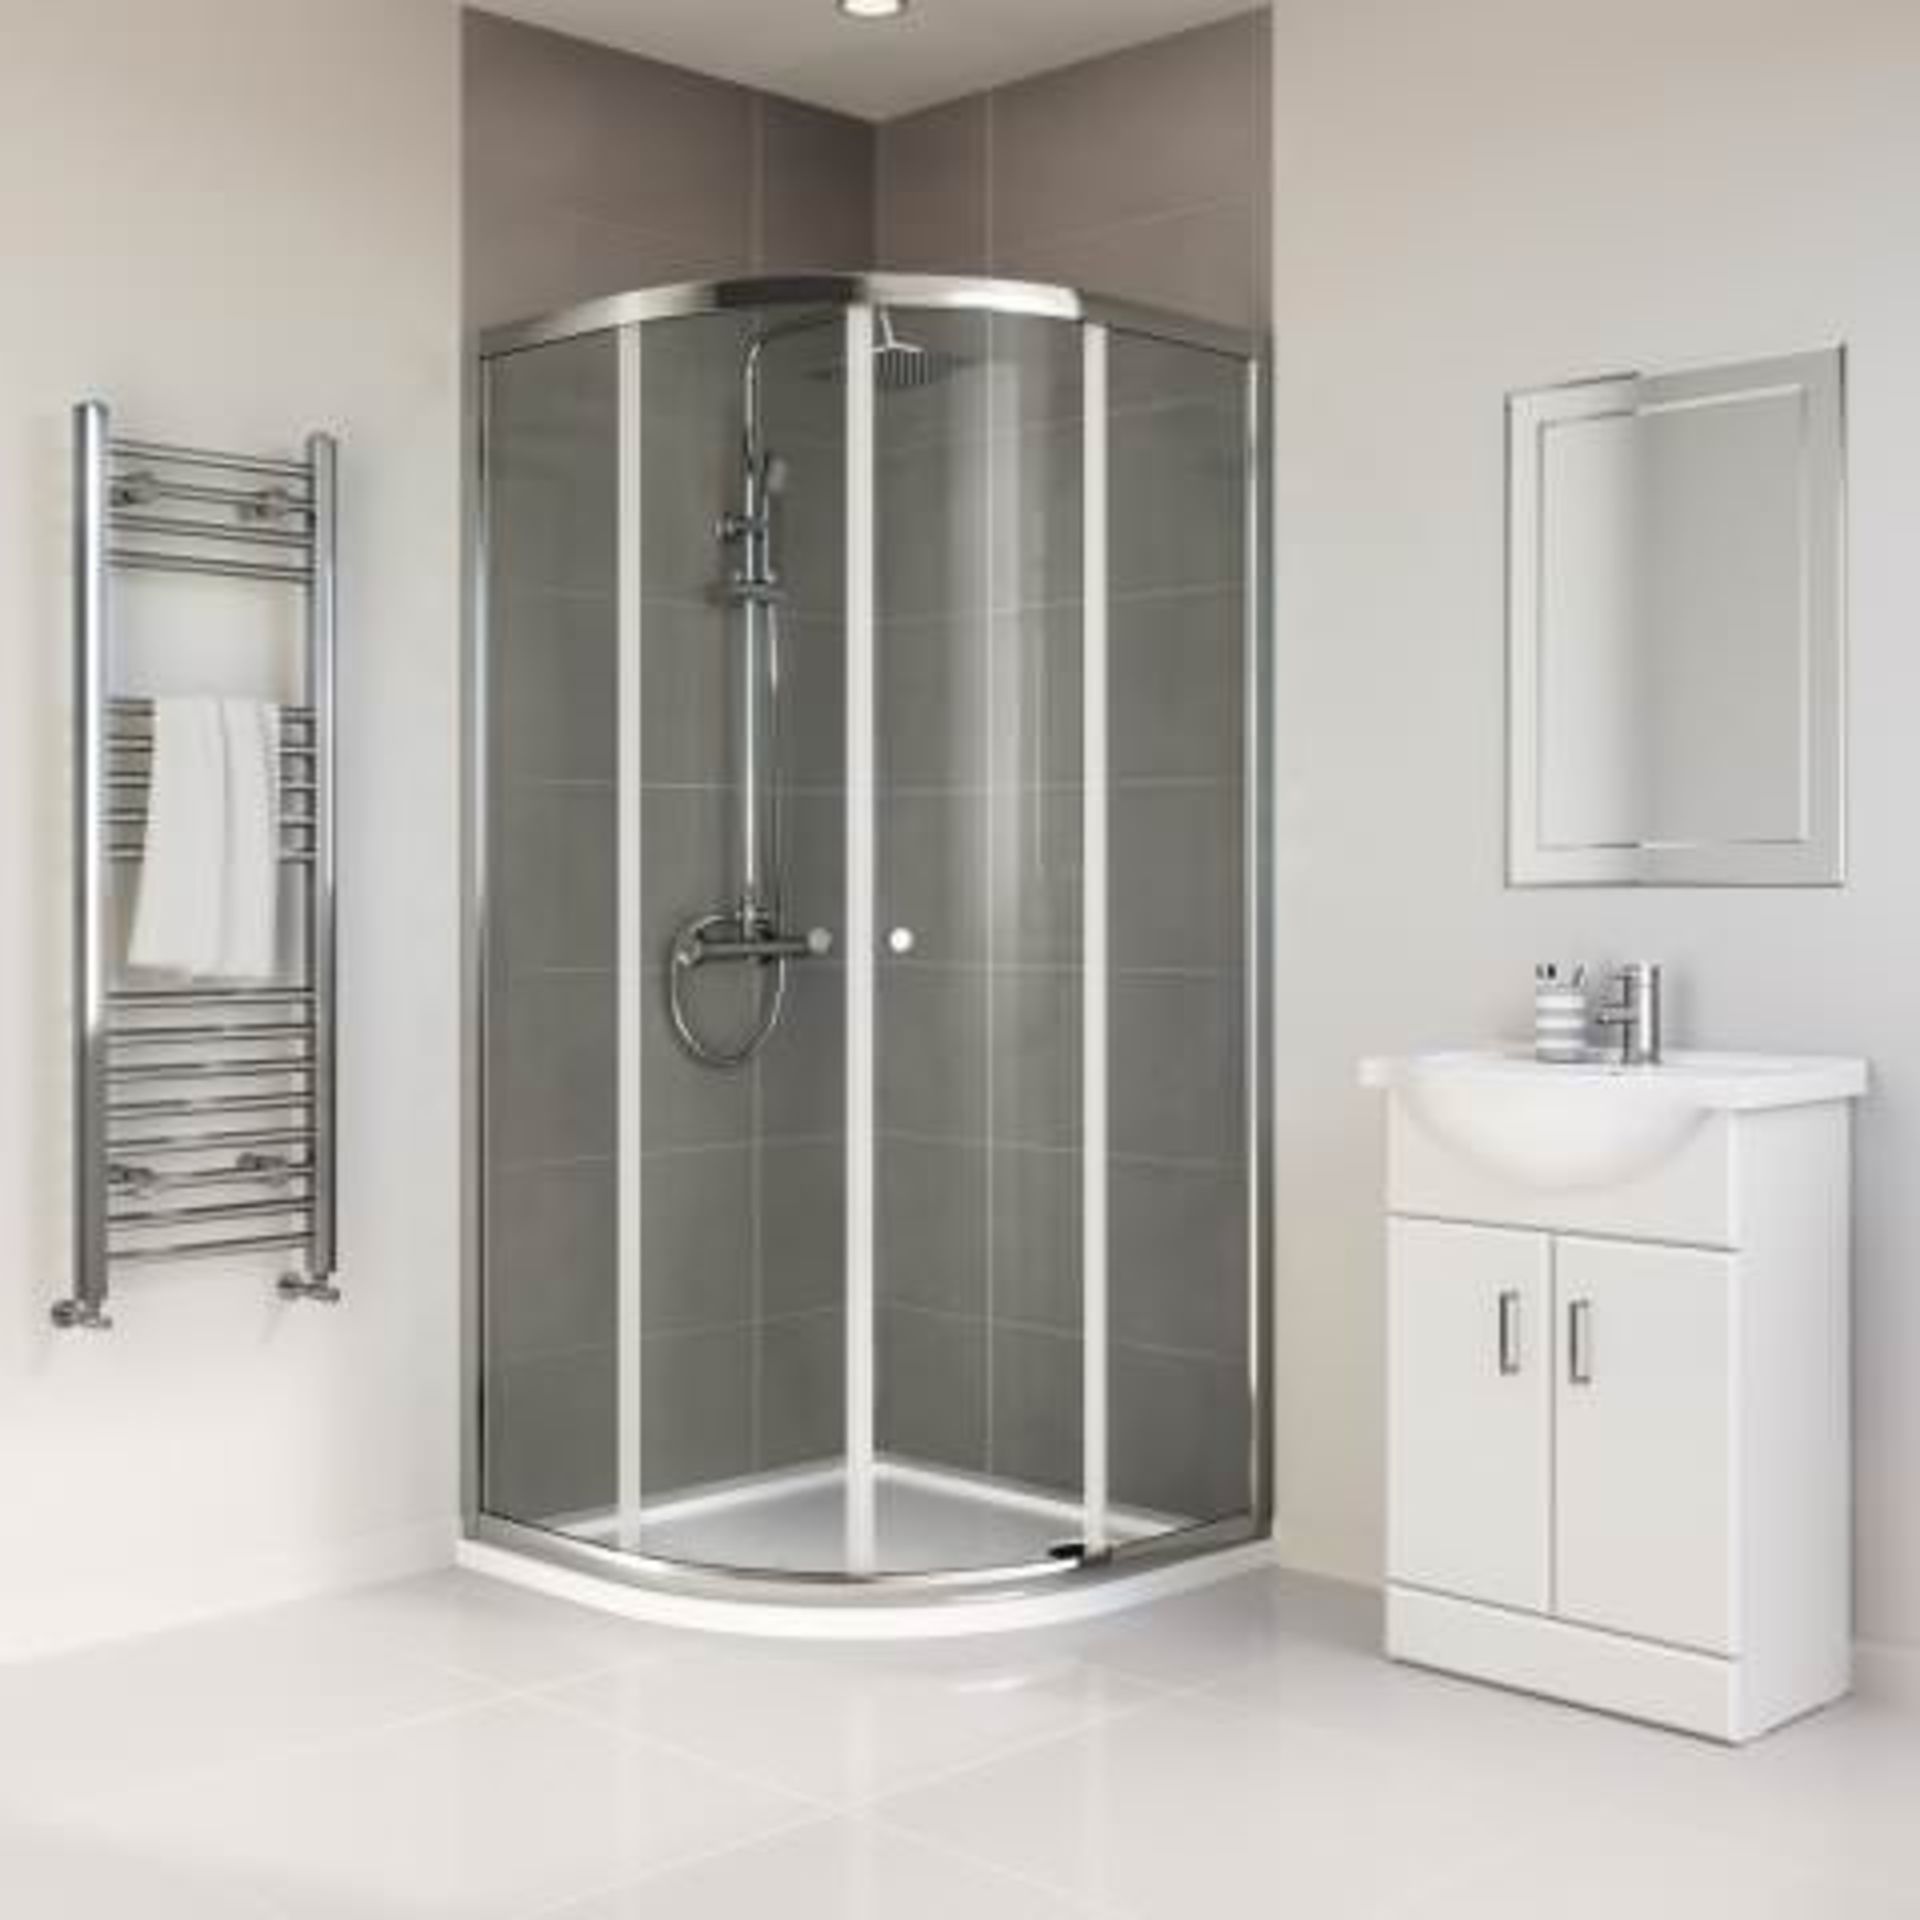 (W142) 900x900mm - Elements Quadrant Shower Enclosure. RRP £229.99. Budget Solution Our entry - Image 2 of 4